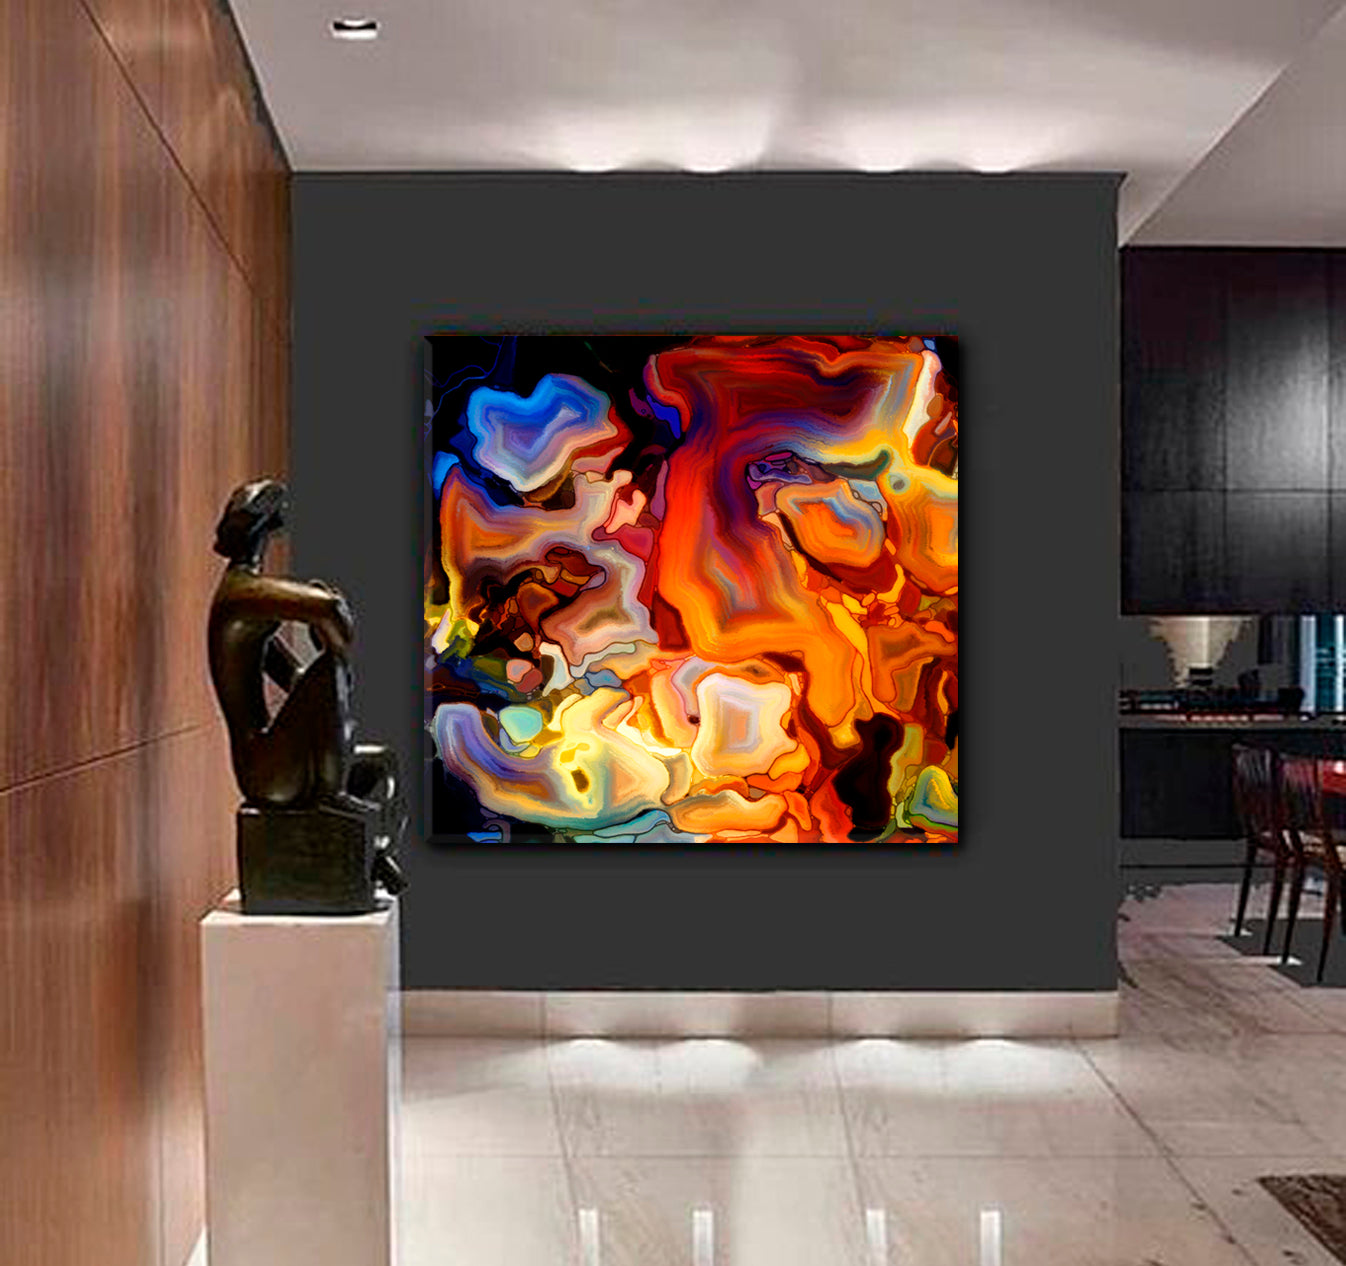 ABSTRACT Trendy Contemporary Art - Square Panel Contemporary Art Artesty   